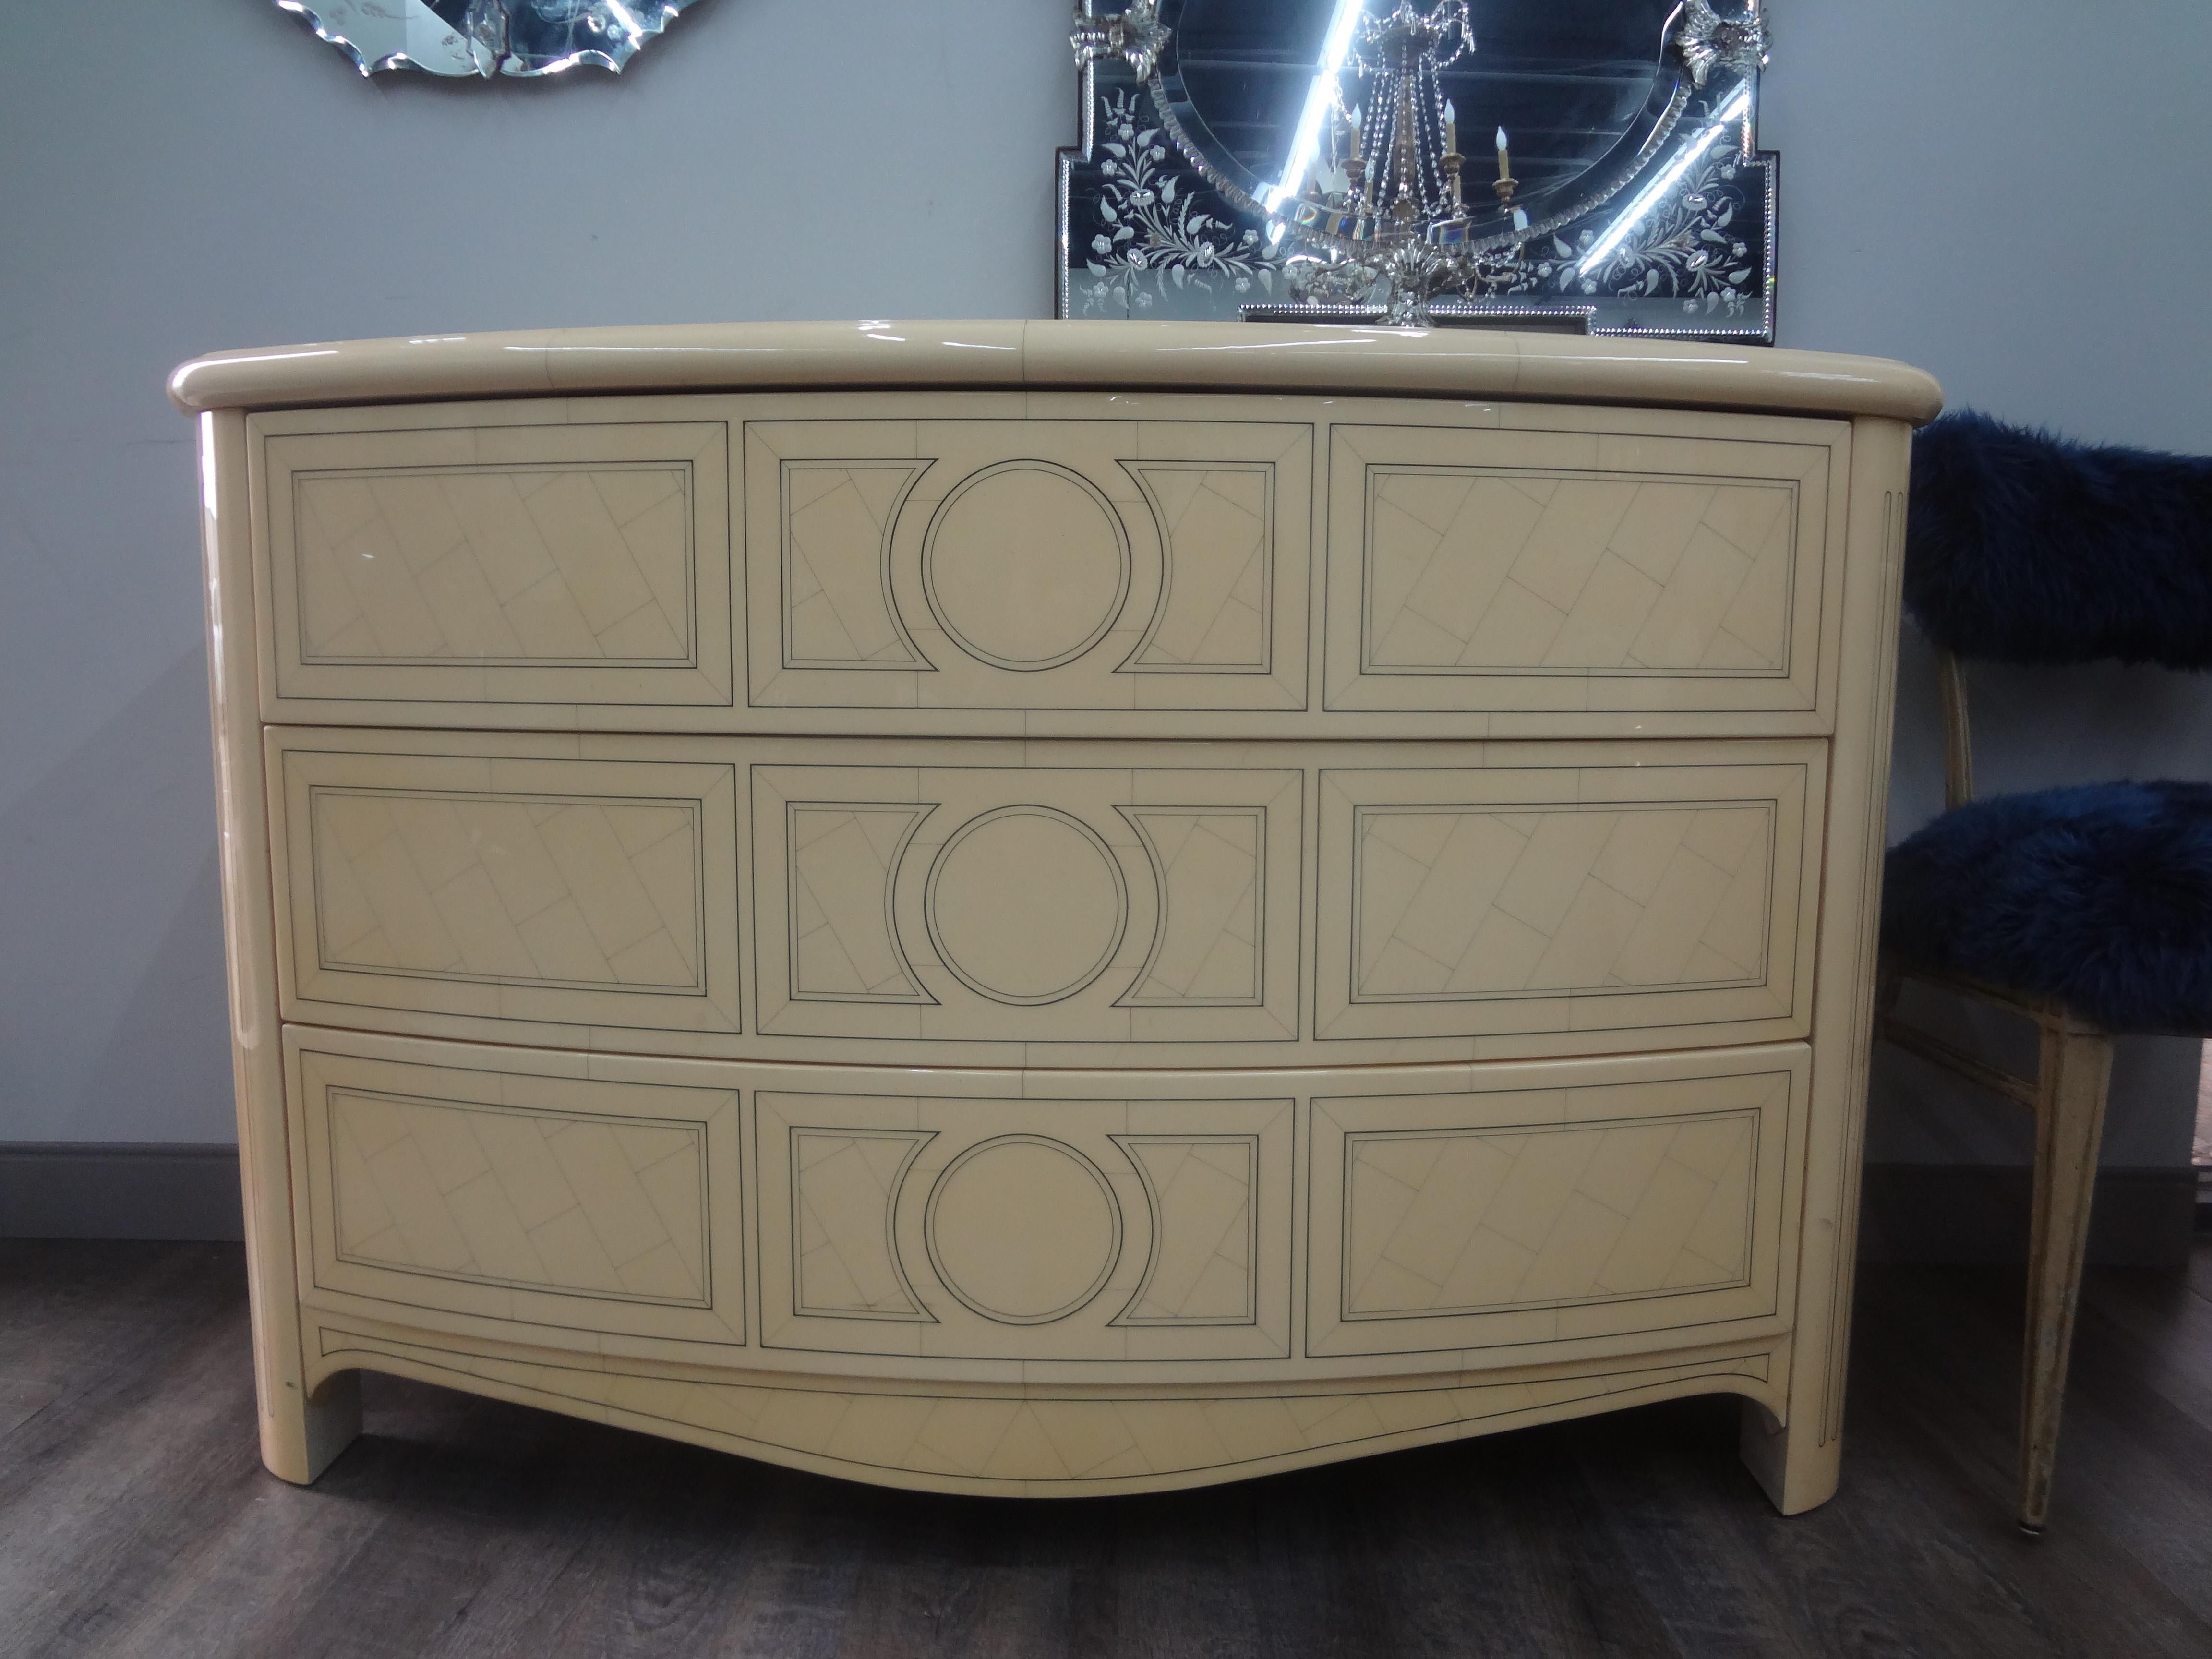 French Louis XVI style Maison Jansen lacquered commode.
This stunning vintage French Louis XVI style Maison Jansen three drawer commode, credenza or chest is lacquered a lovely ivory color with a geometric design on the front, sides and top.
It